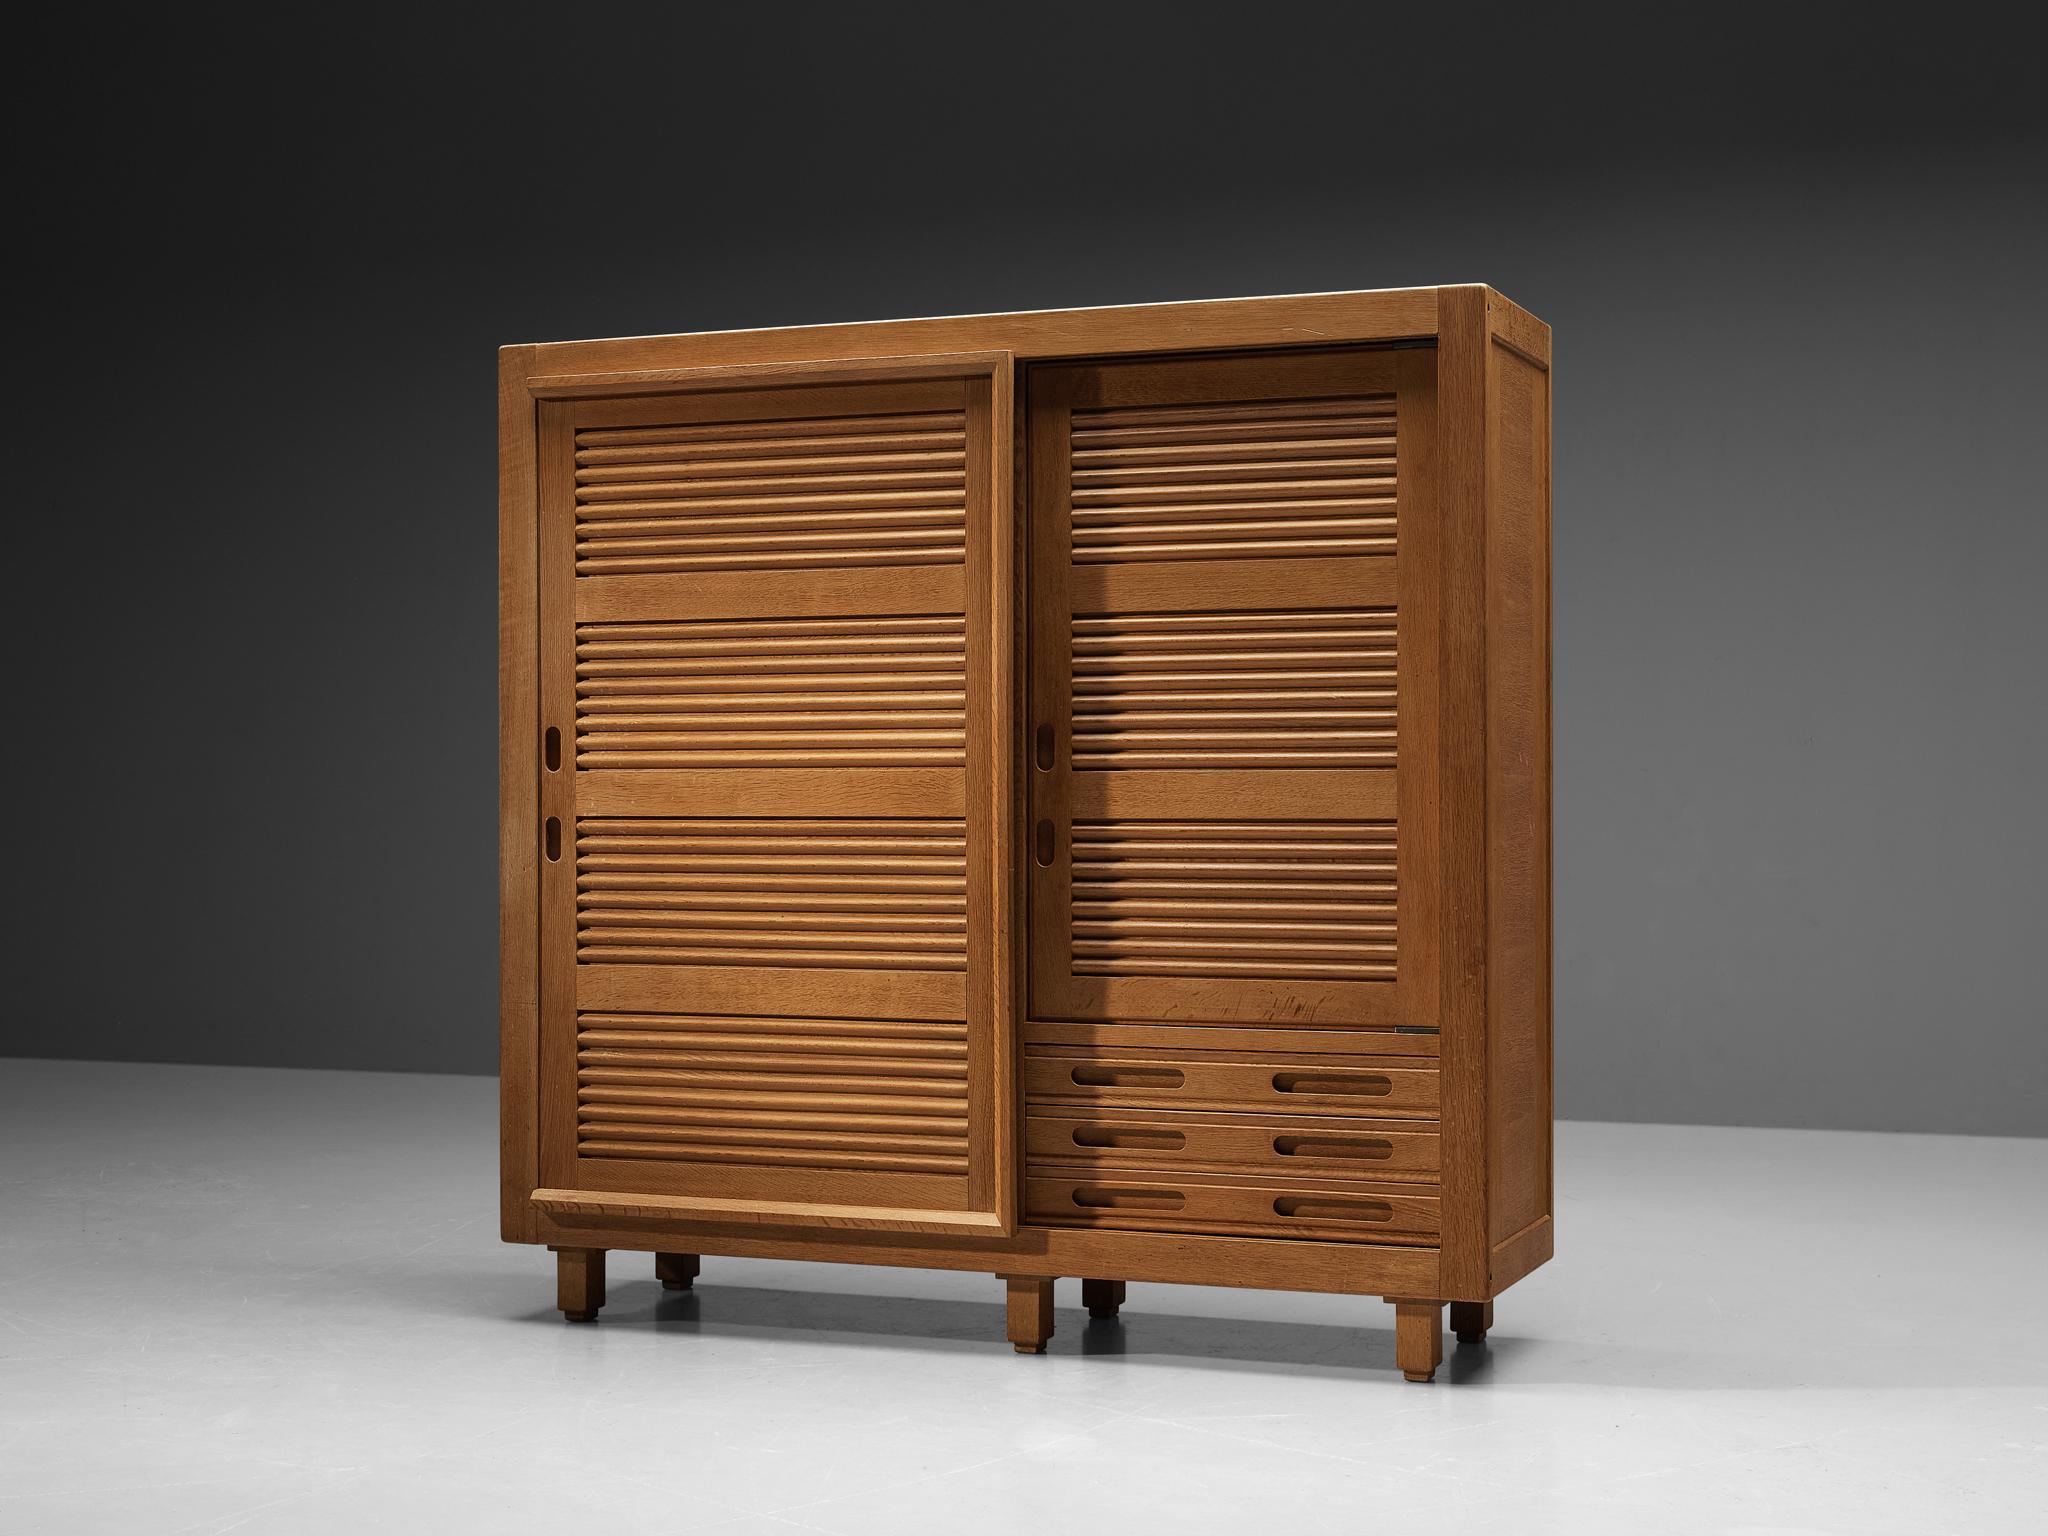 Guillerme et Chambron for Votre Maison, wardrobe, oak, France, 1960s

This case piece is designed by Guillerme and Chambron and features two vividly carved doors, which are characteristic for the French duo. The wardrobe features distinct sculptural